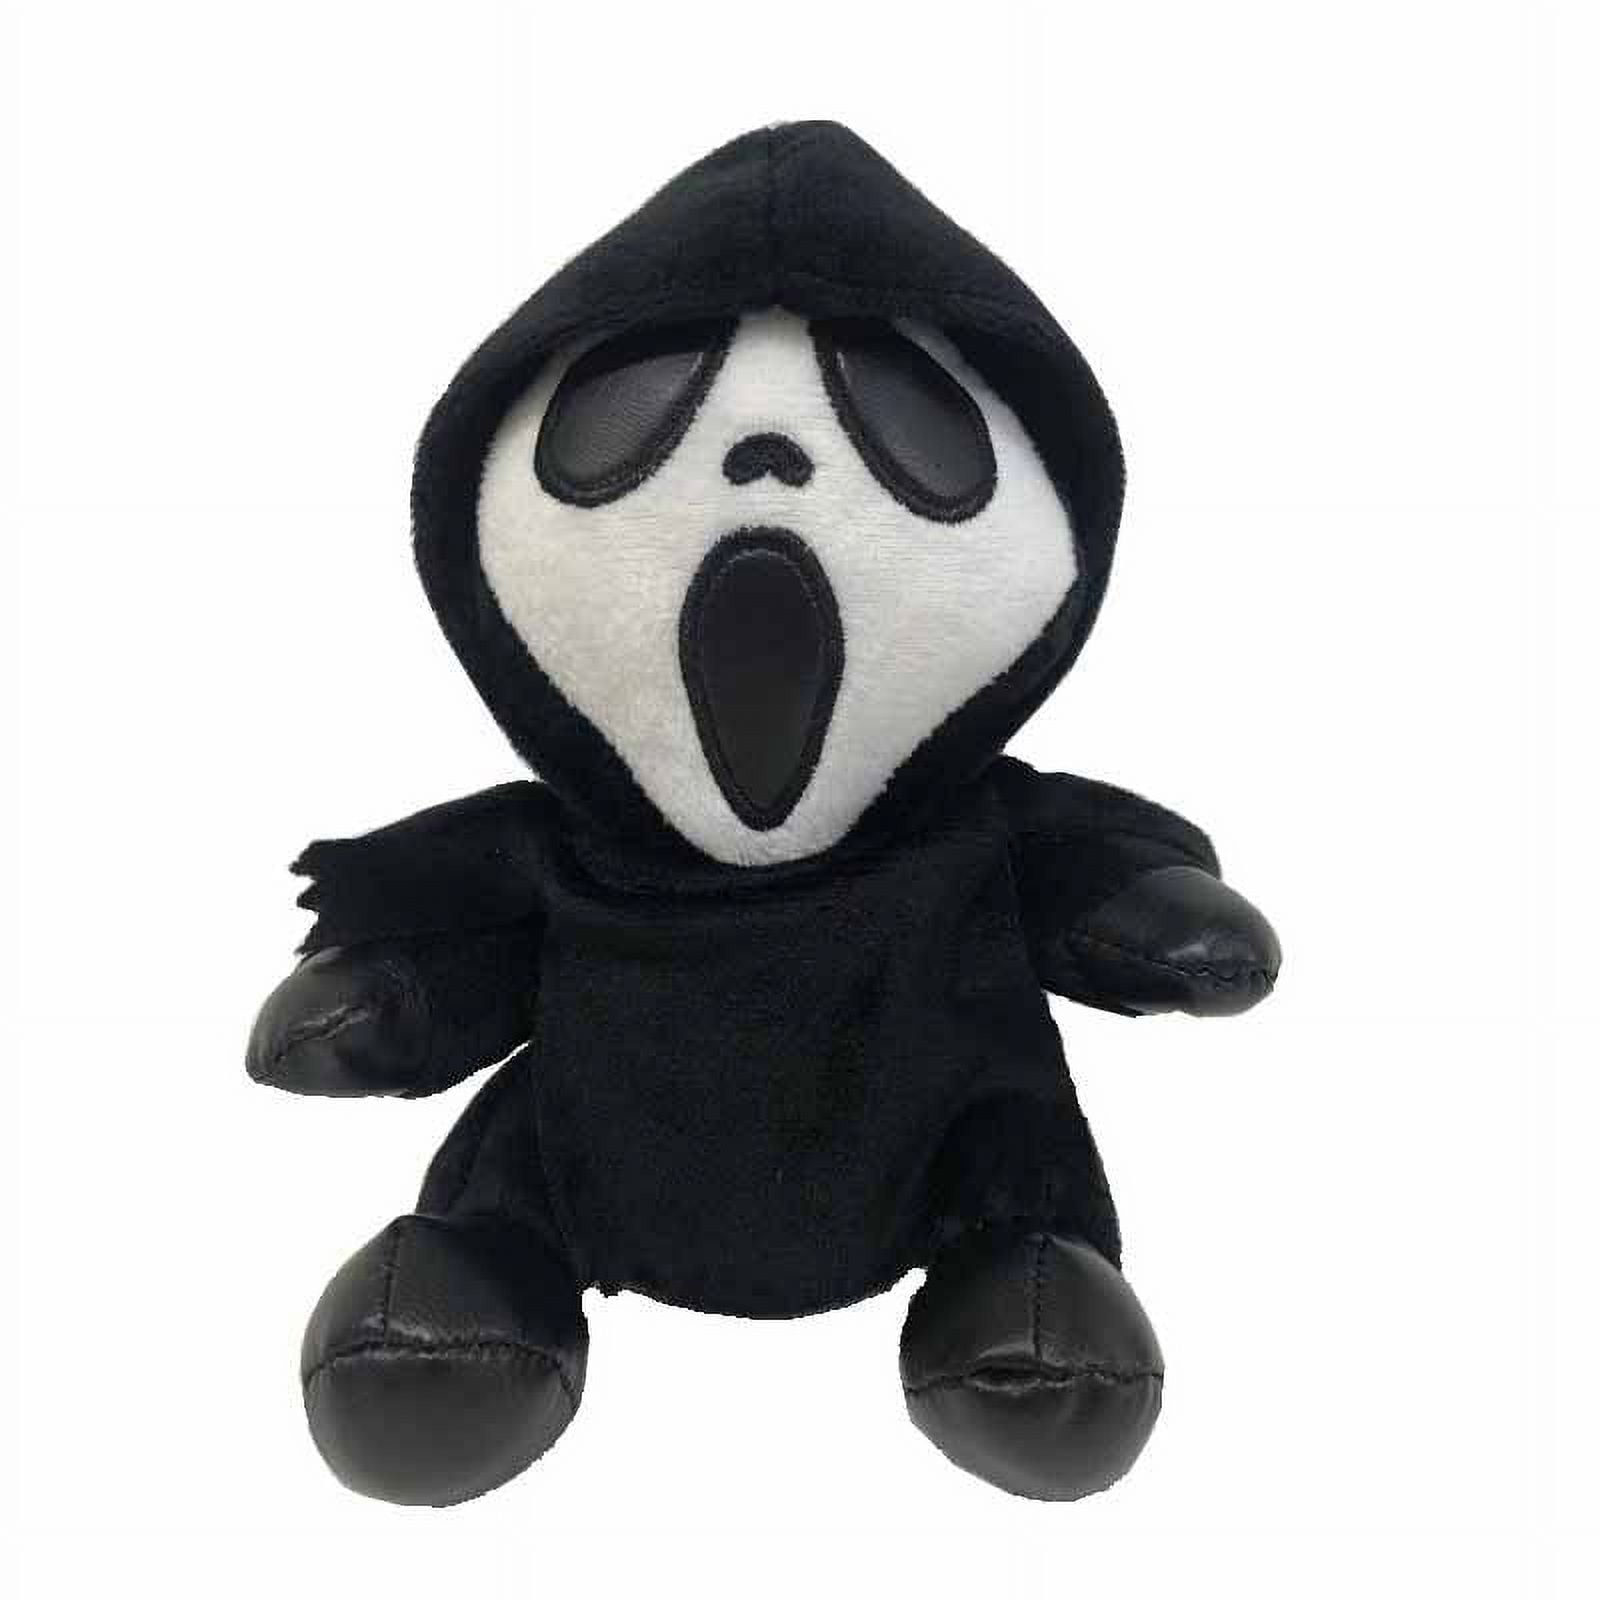 MDS Ghost Face Roto Plush Doll – Nightmare Toys